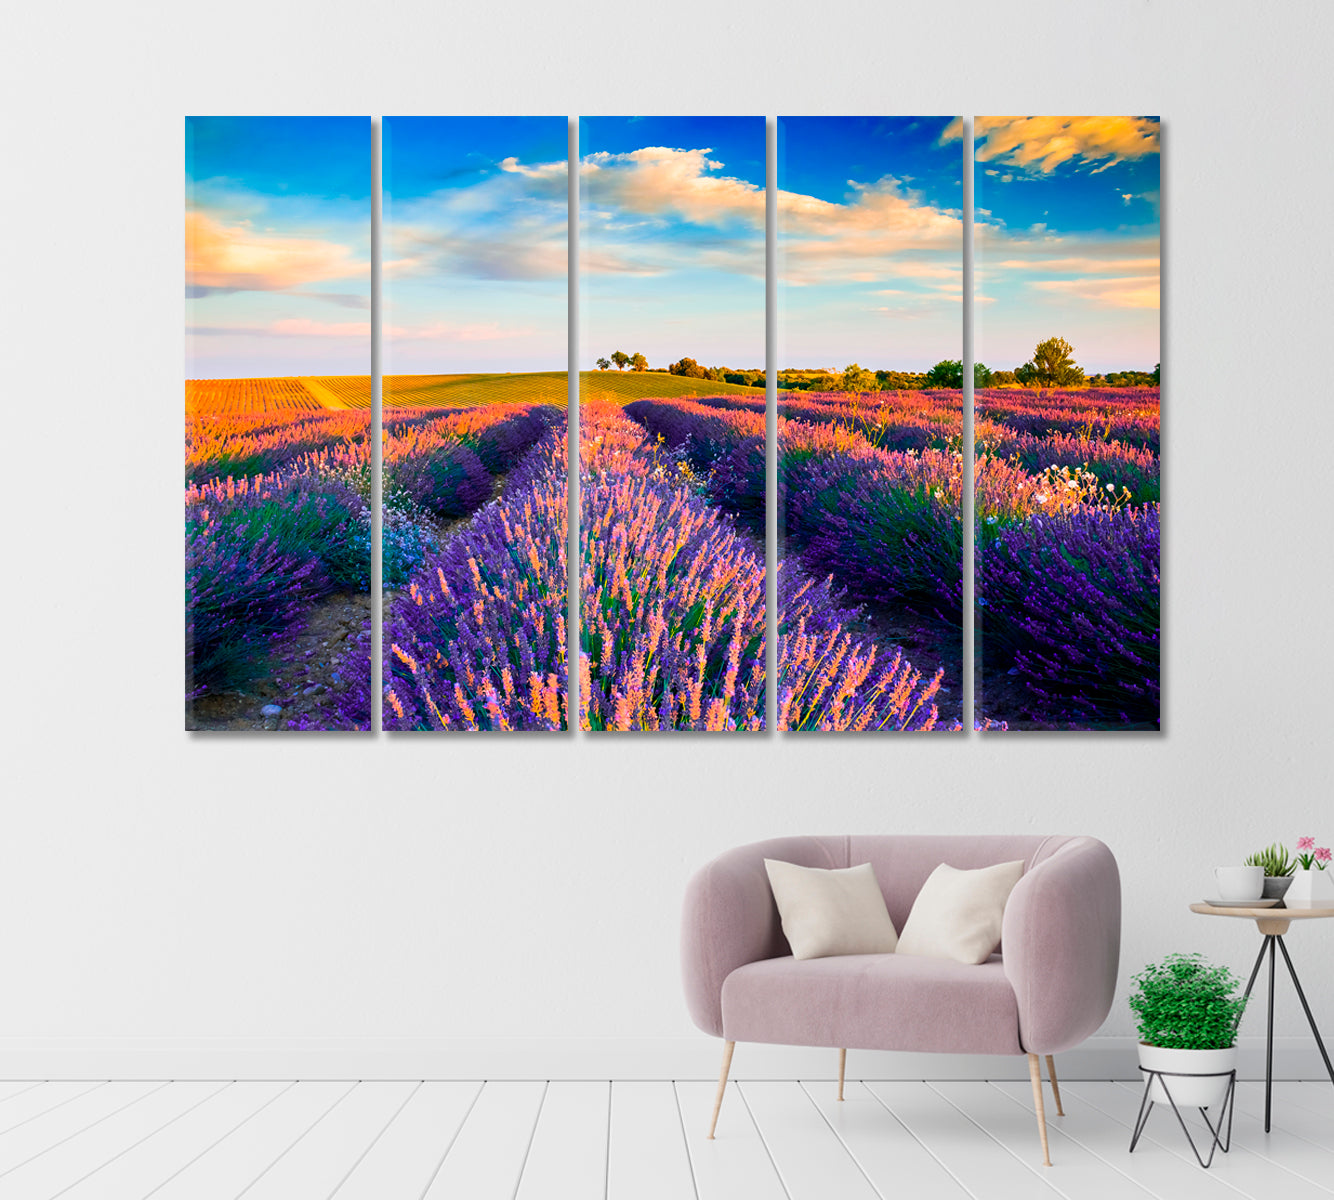 Lavender Field and Provence Hills Canvas Print-Canvas Print-CetArt-1 Panel-24x16 inches-CetArt